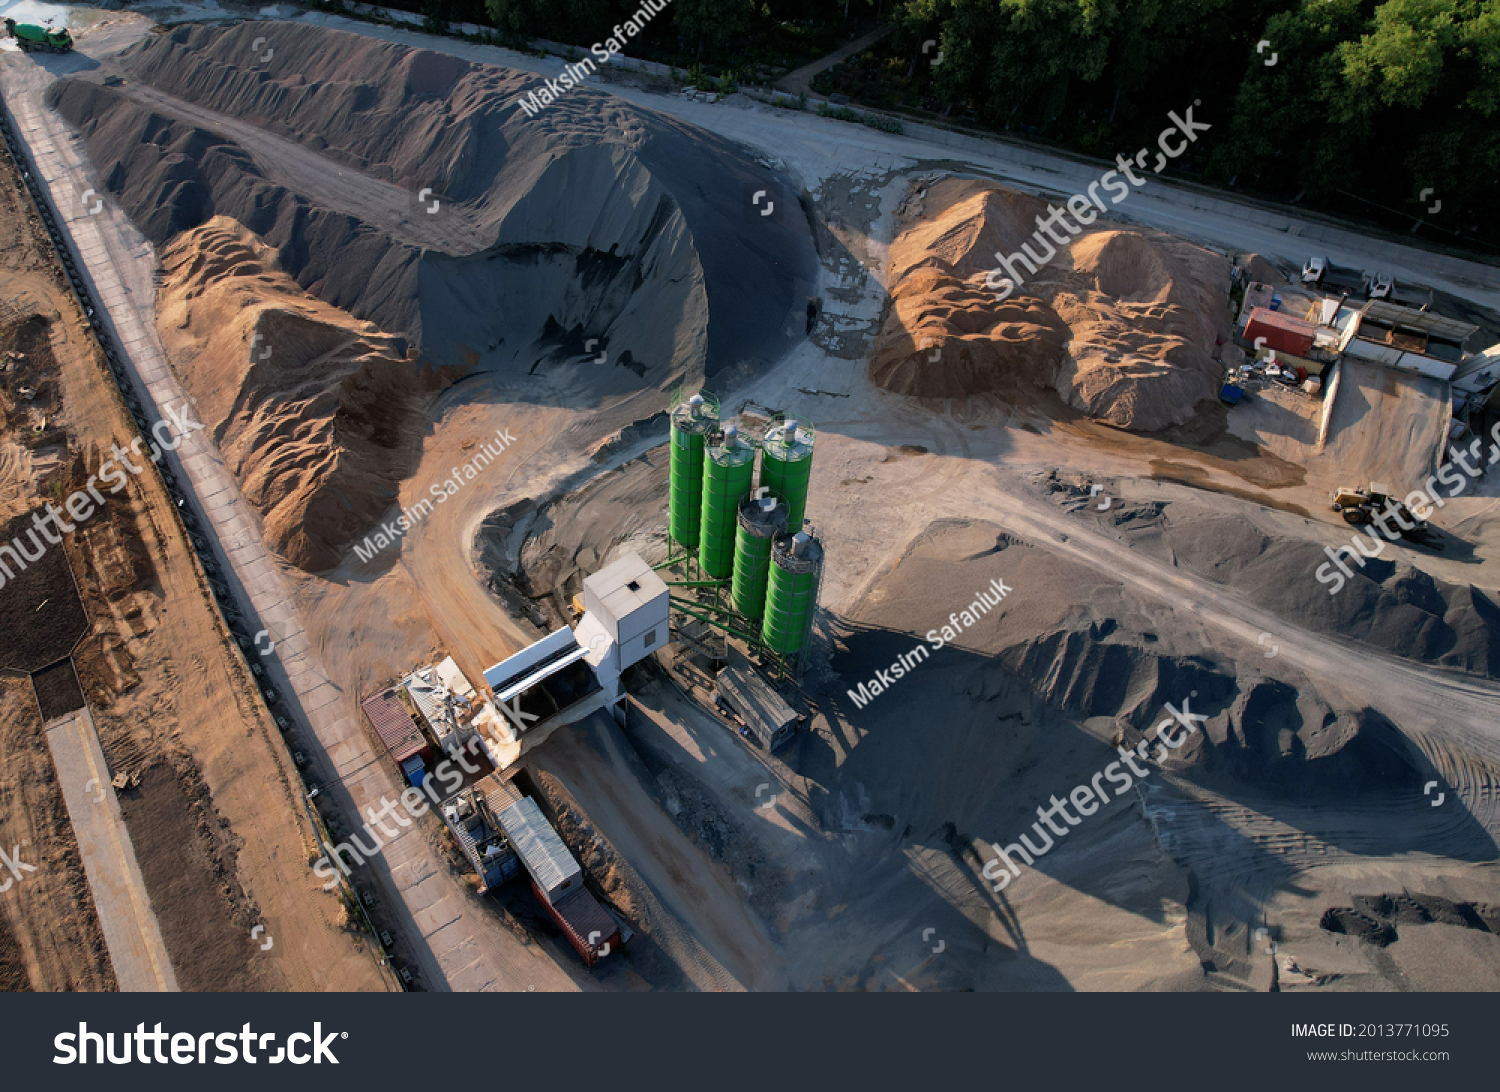 Ready mix concrete batching plant. Producing сoncrete and portland cement mortar for construction and formworks. Pouring concrete through to a ready-mixed truck. Drone view. Out of focus #2013771095